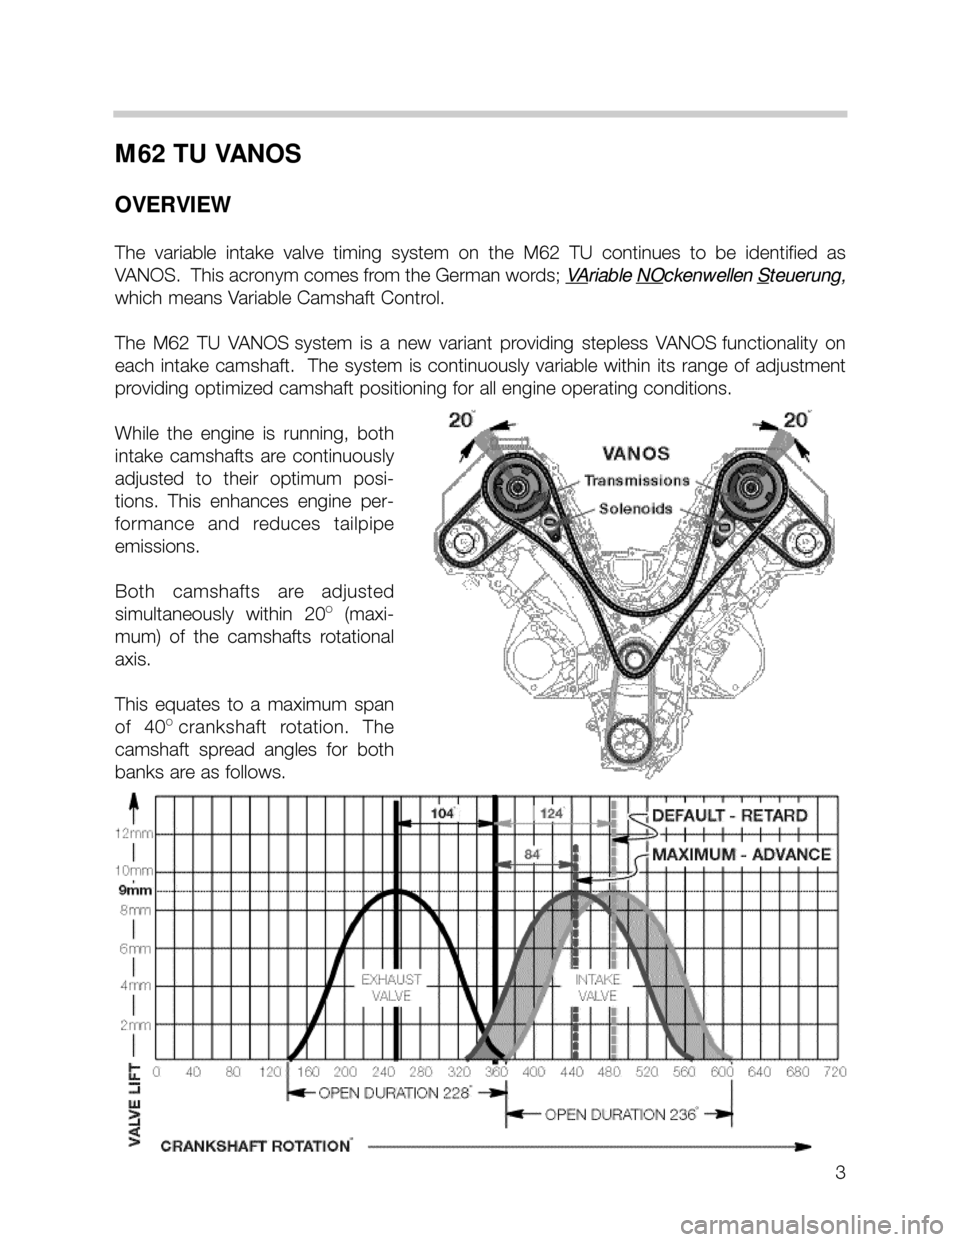 BMW X5 2003 E53 M62TU Engine Workshop Manual 3
M62 TU VANOS
OVERVIEW
The  variable  intake  valve  timing  system  on  the  M62  TU  continues  to  be  identified  as
VANOS.  This acronym comes from the German words; V
Ariable NOckenwellen Steue